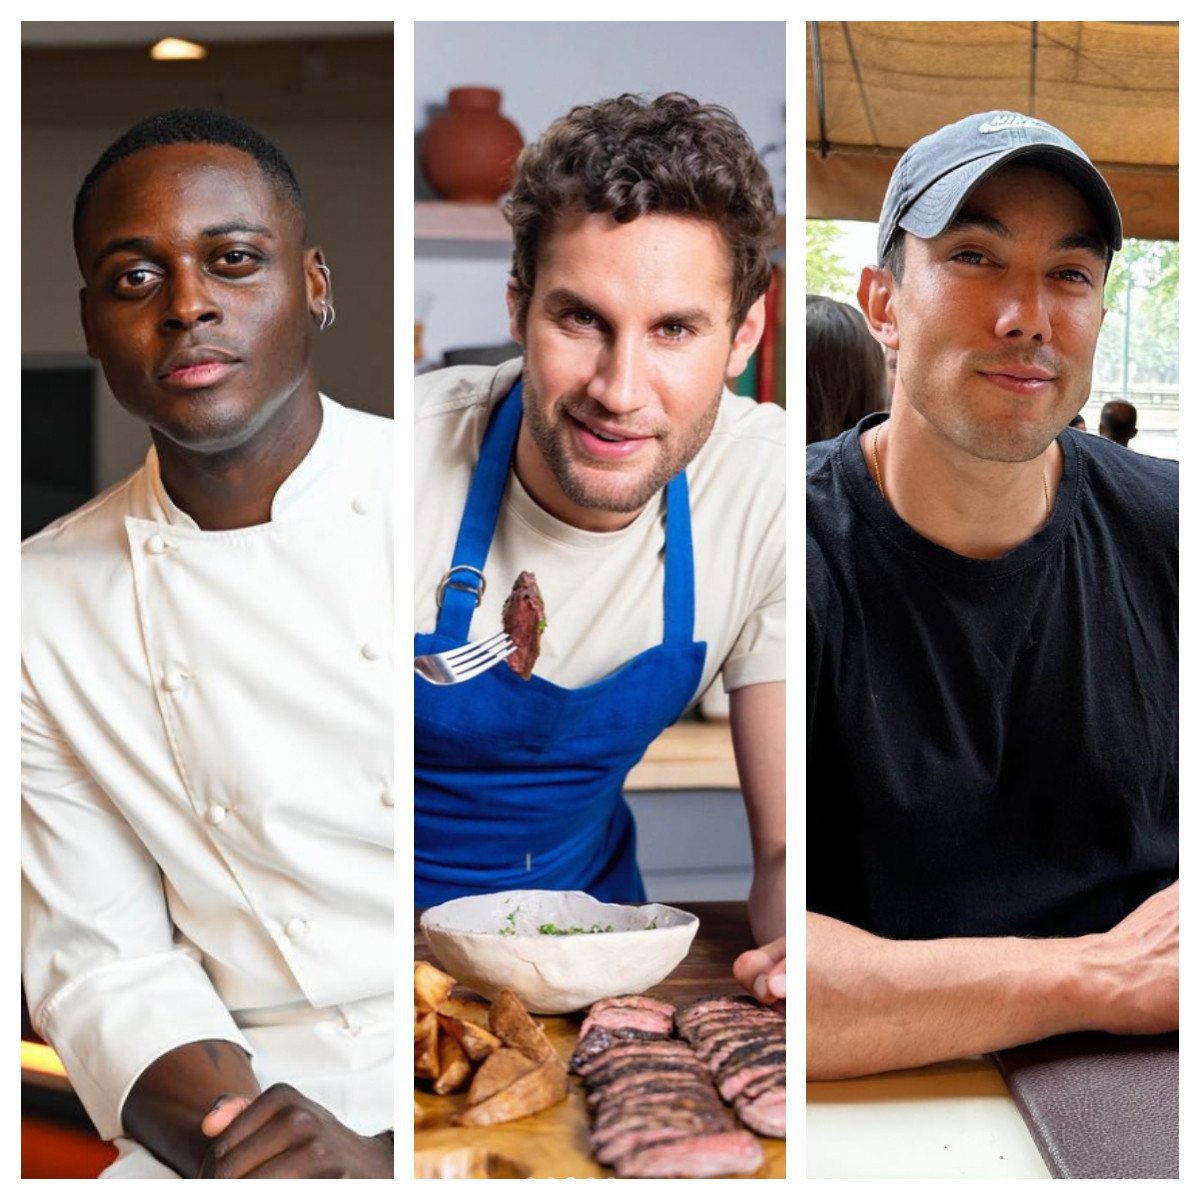 Chefs Roze Traore, Franco Noriega and Cedric Lorenzen offer culinary excellence – and then some. Photos: @rozetreore, @franconorhal, @cedrilorenzen/Instagram